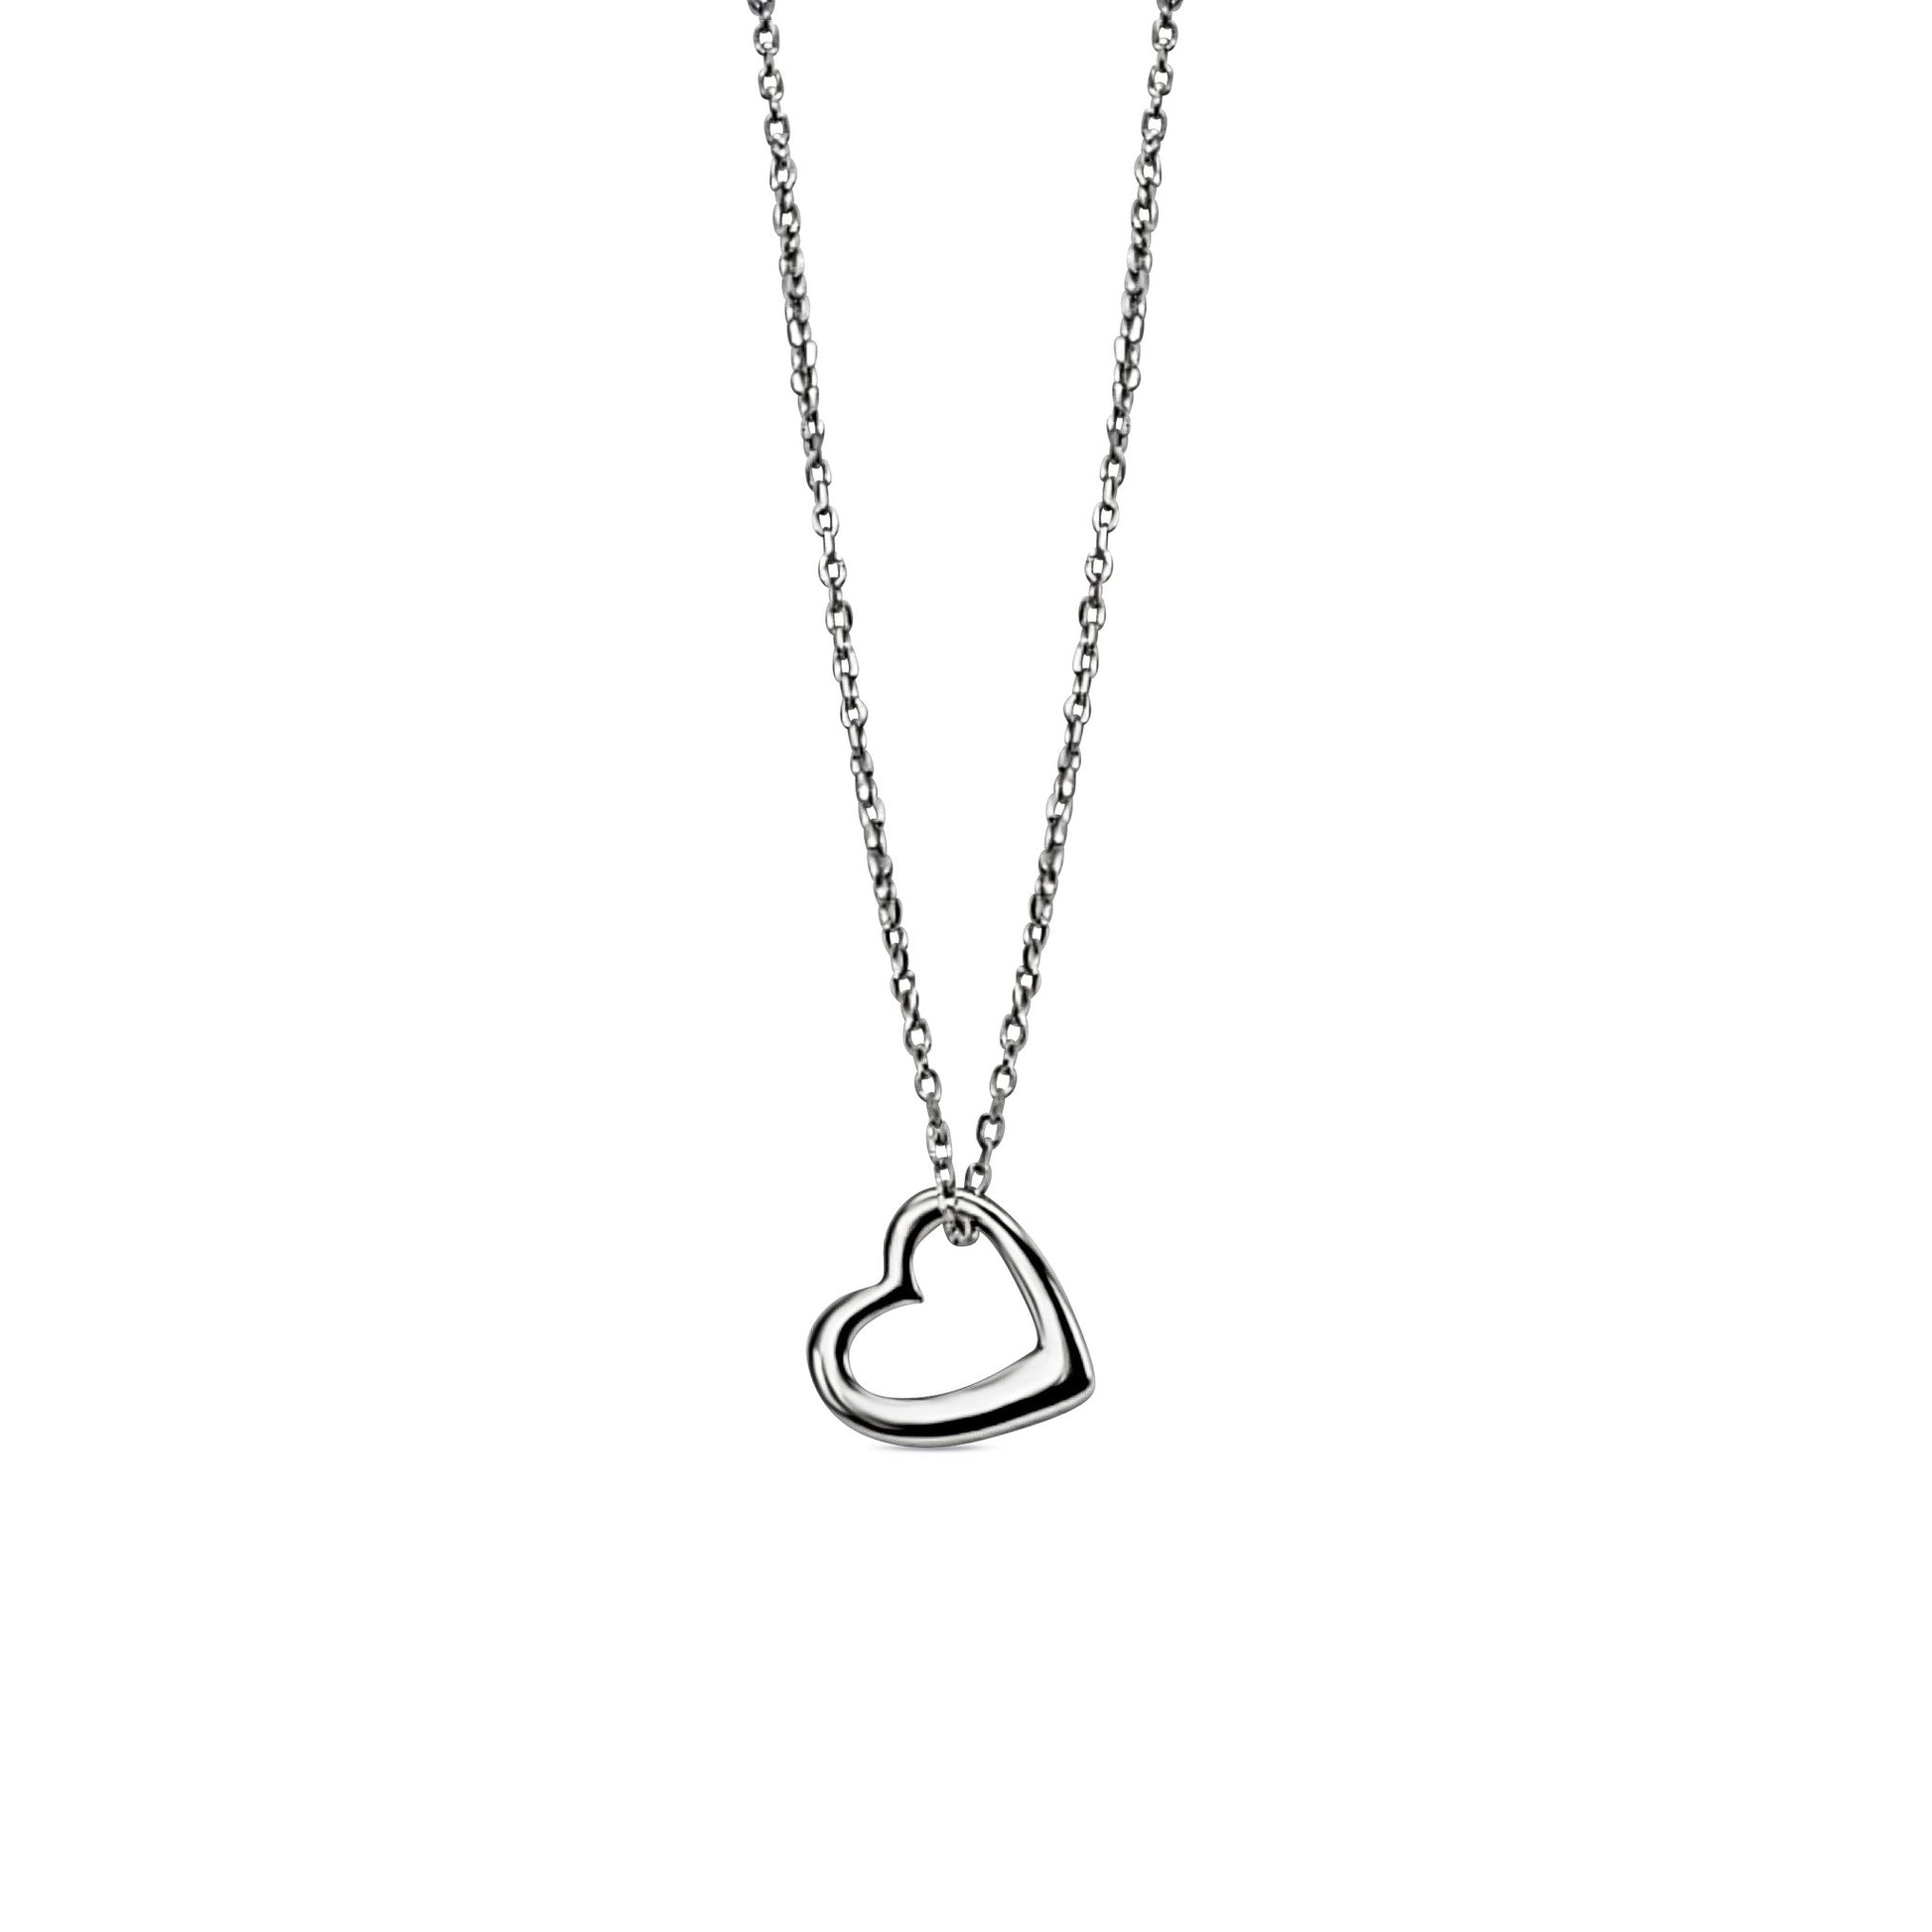 Amia Heart necklace in sterling silver